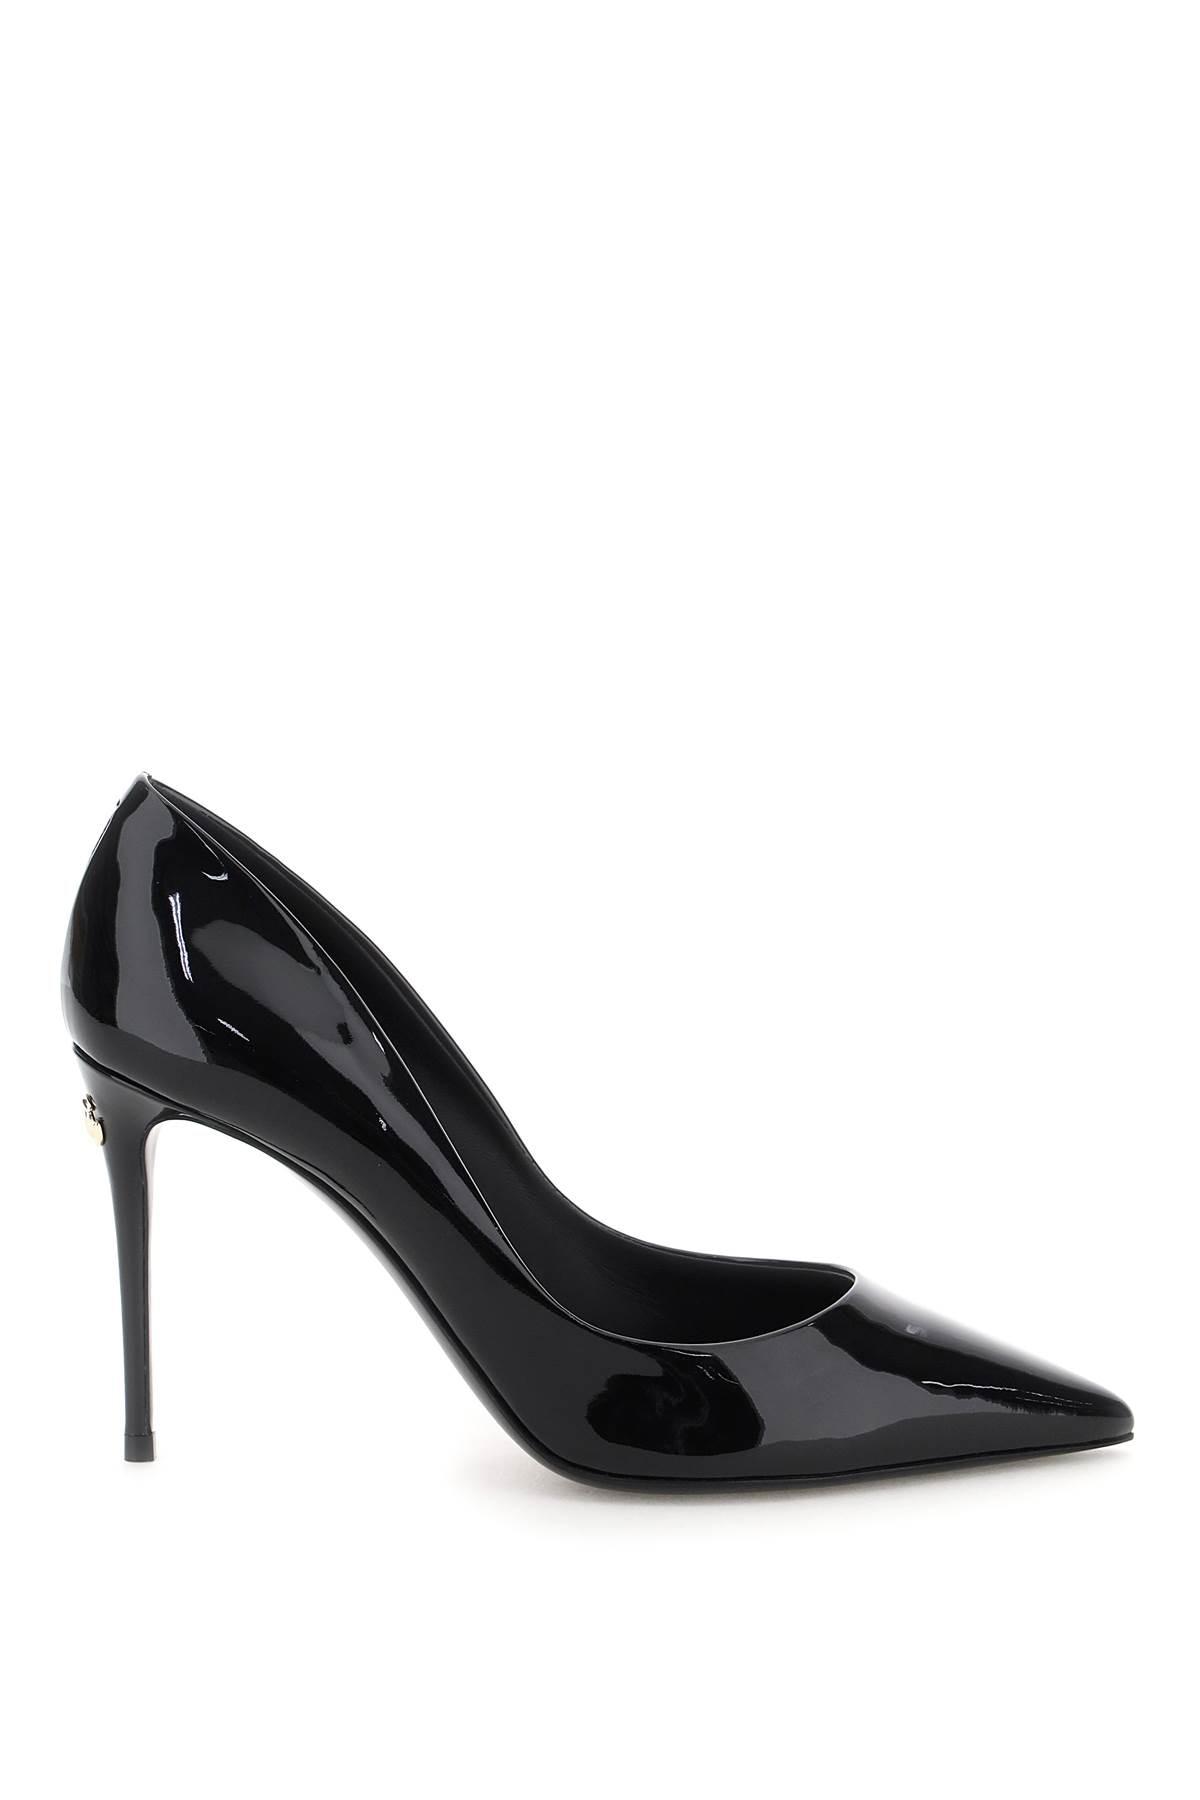 Womens Shoes Heels Pump shoes Dolce & Gabbana Alexa Patent Leather Slingback Pumps in Black 